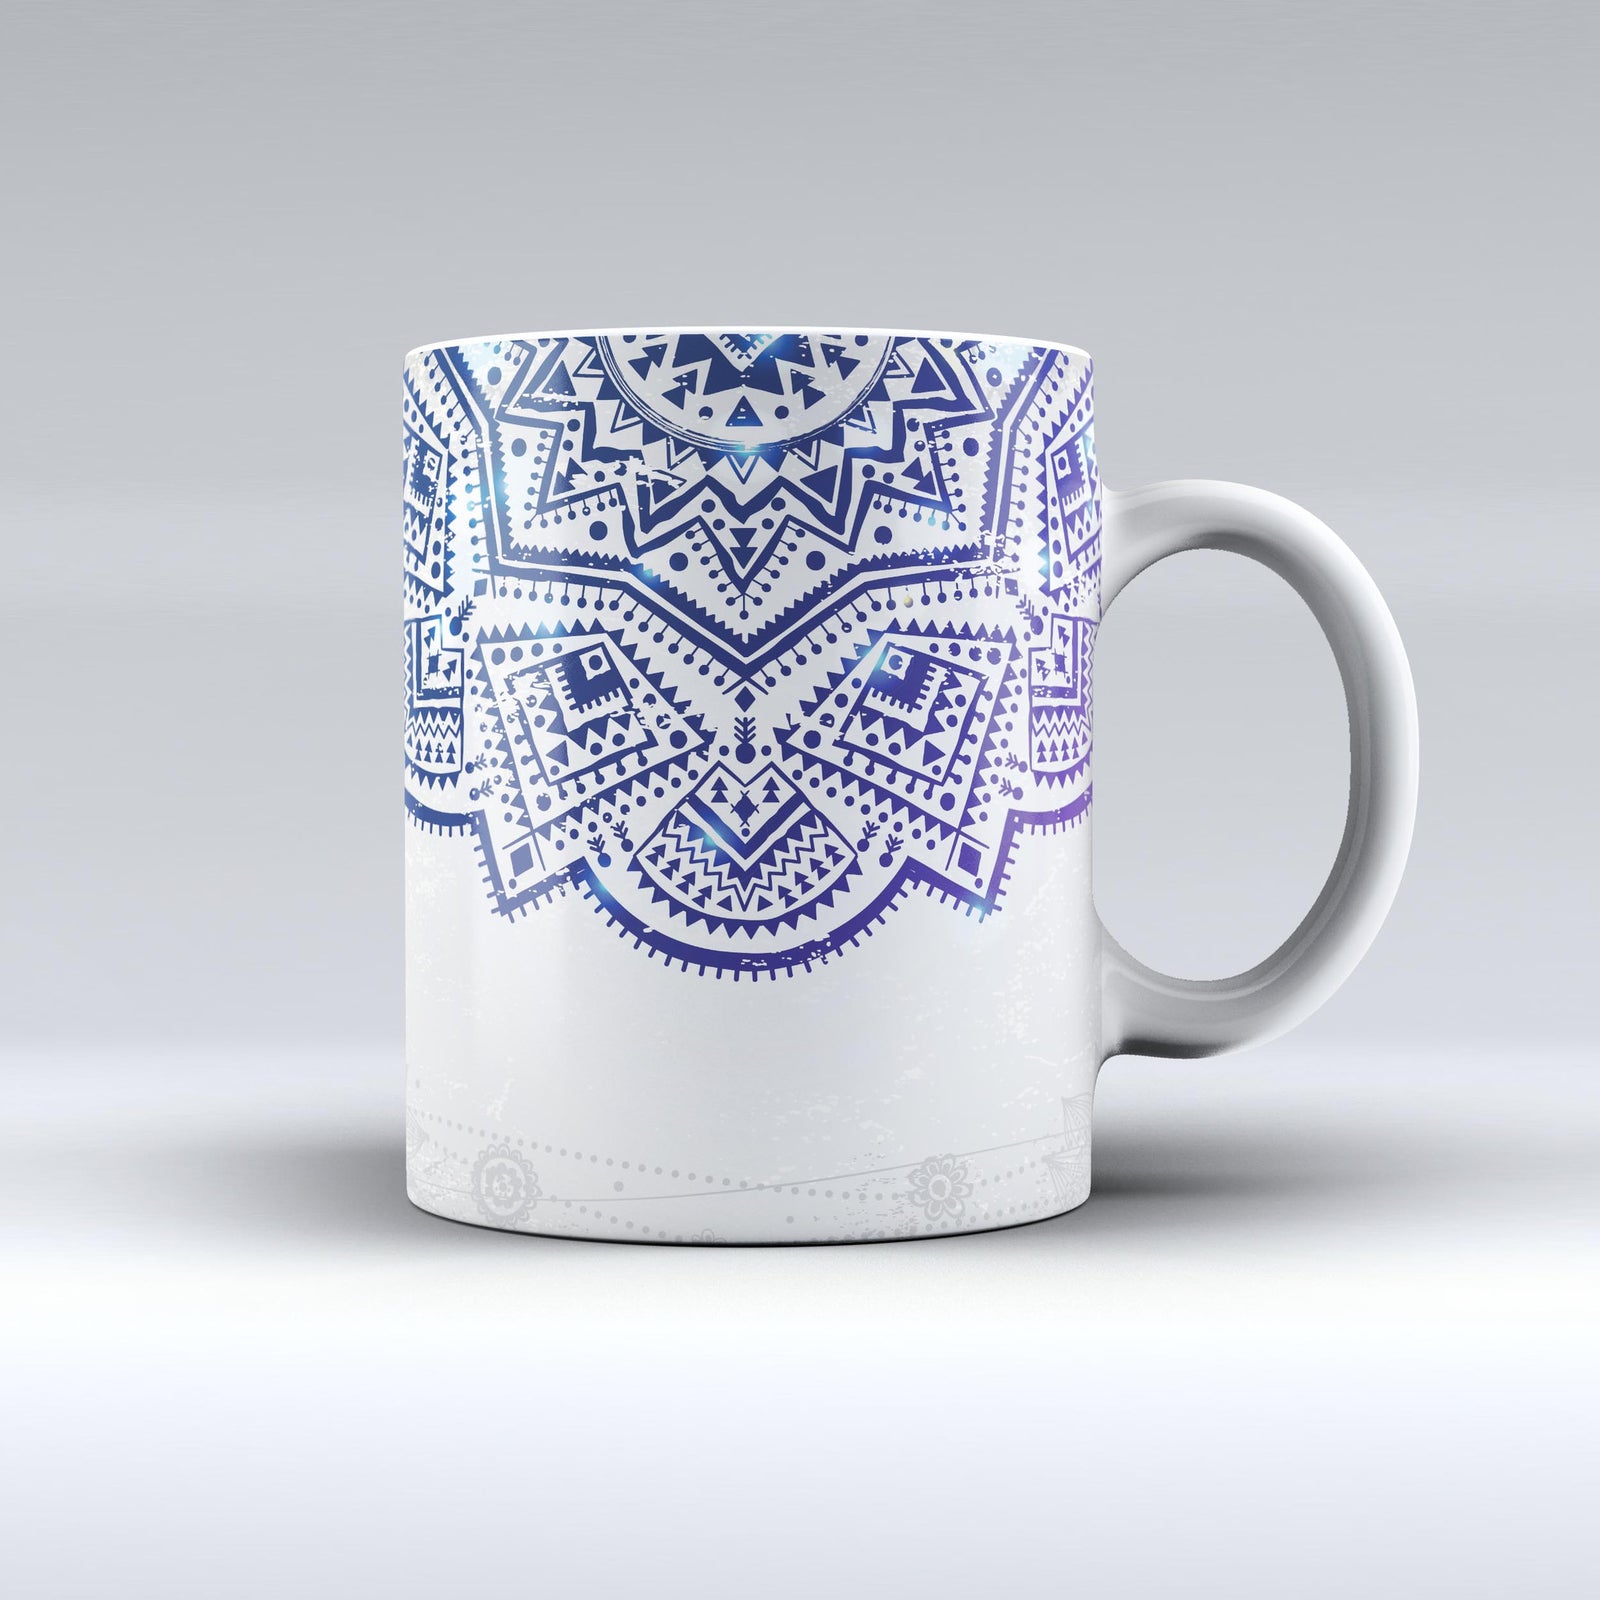 The Ethnic Indian Vector Ornament ink-Fuzed Ceramic Coffee Mug ...